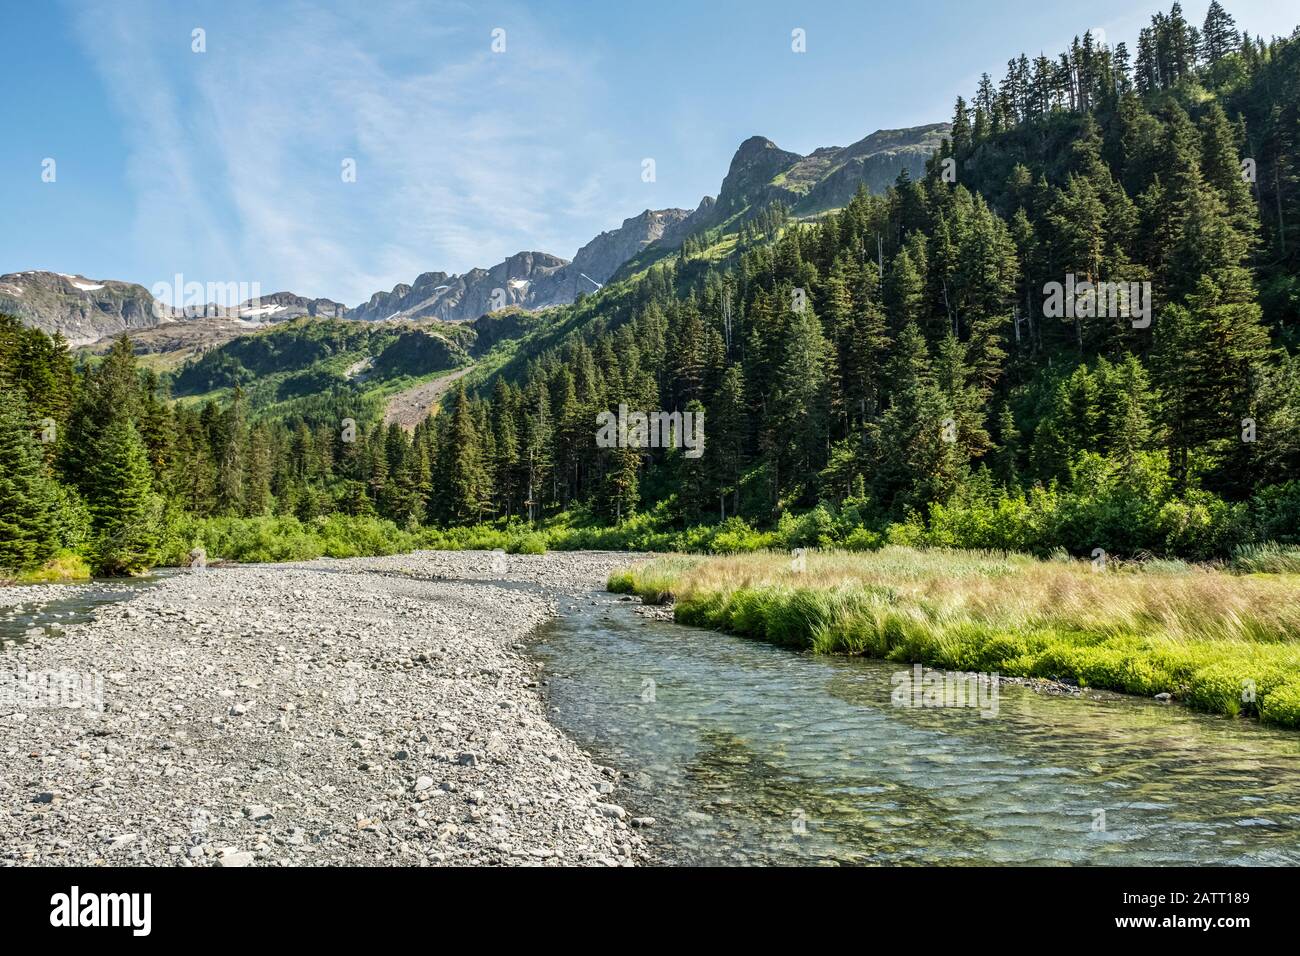 River flowing into Prince William Sound; Alaska, United States of America Stock Photo